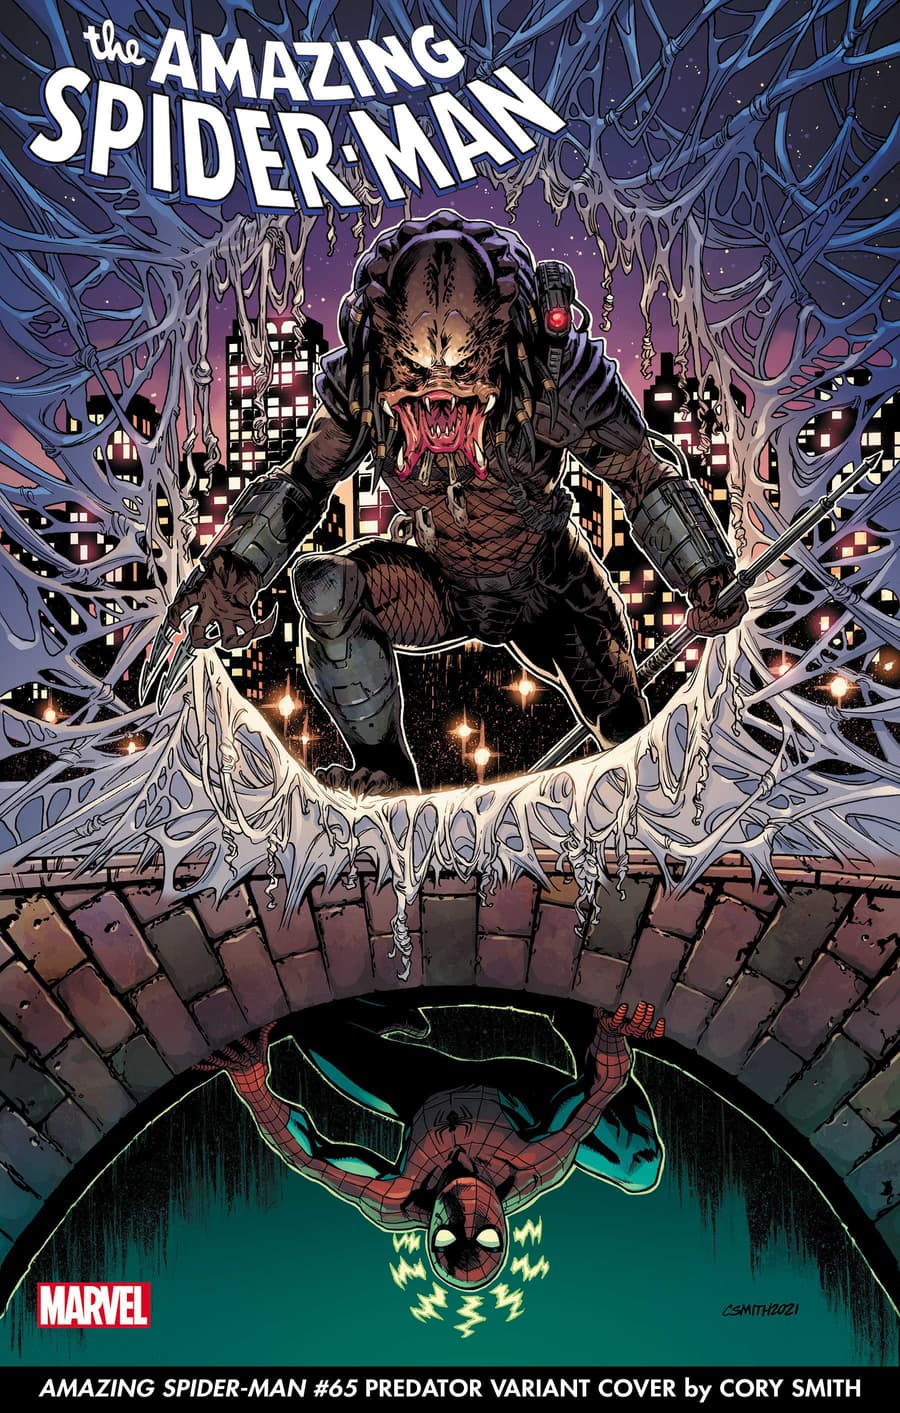 AMAZING SPIDER-MAN #65 PREDATOR VARIANT COVER by CORY SMITH